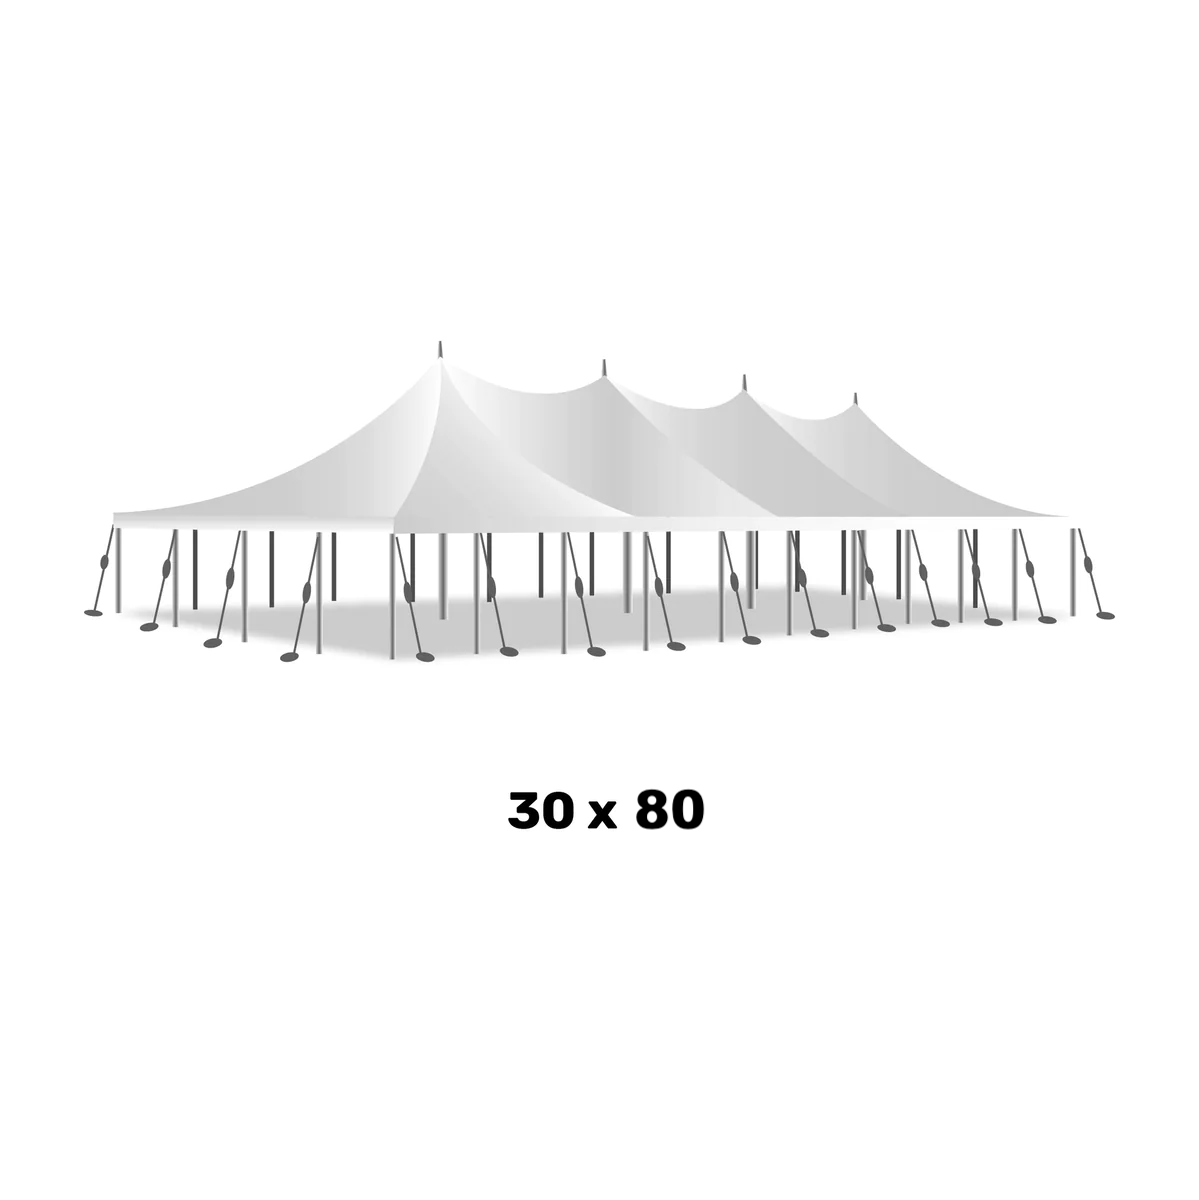 a 30 foot by 80 foot white marquee high peak pole tent